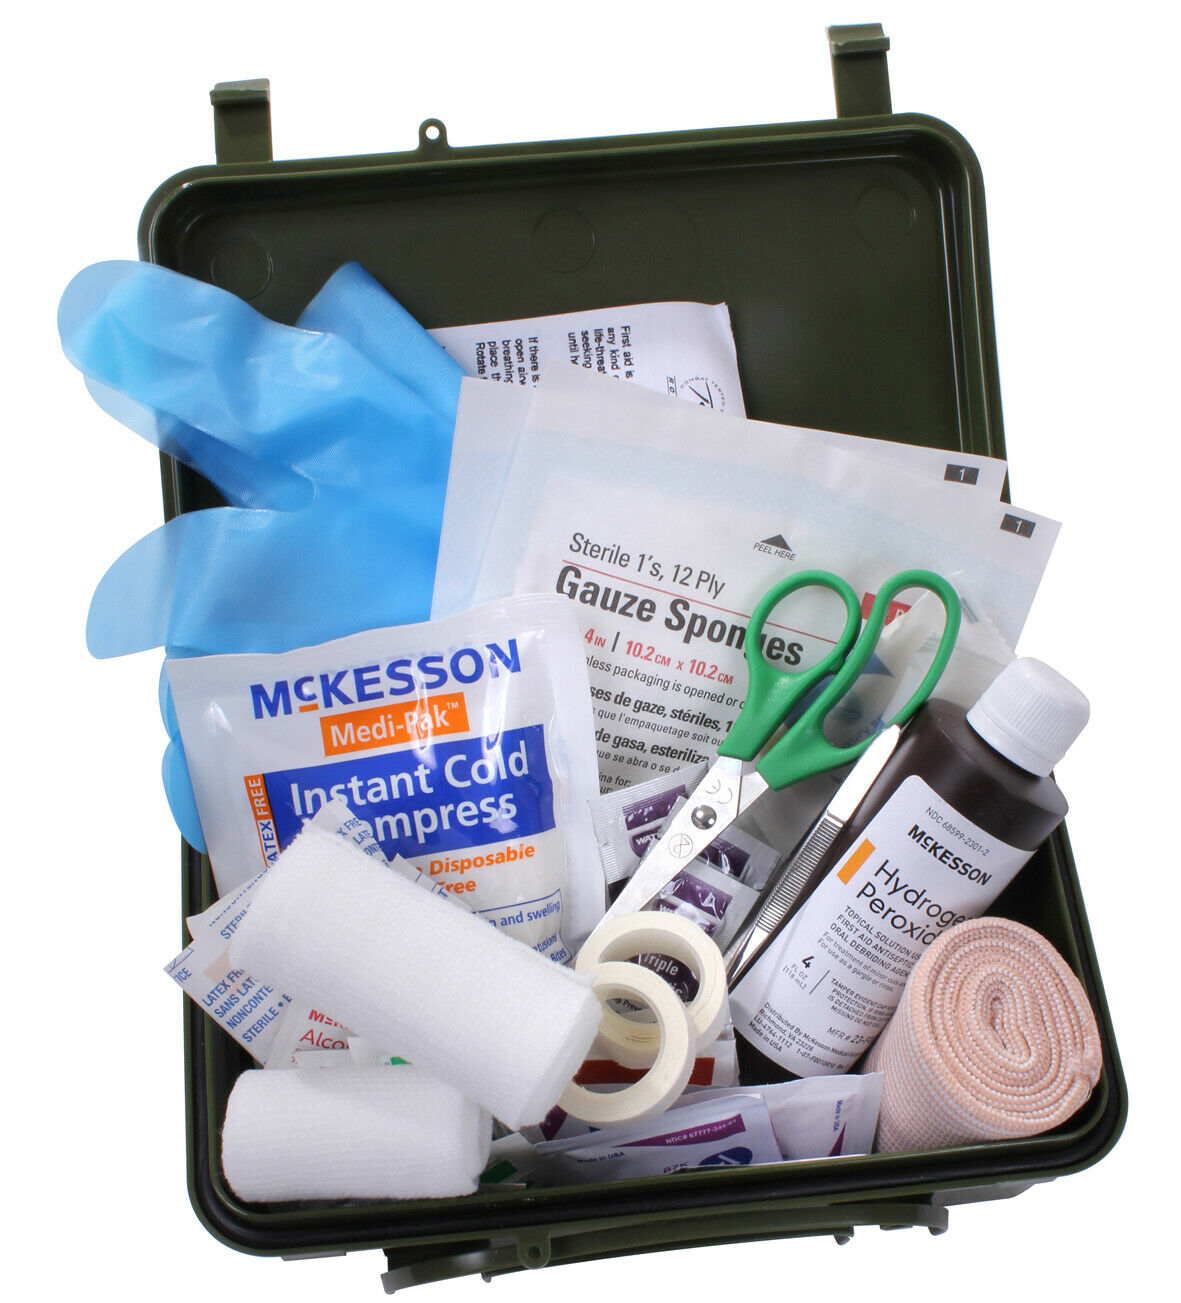 Rothco General Purpose First Aid Kit